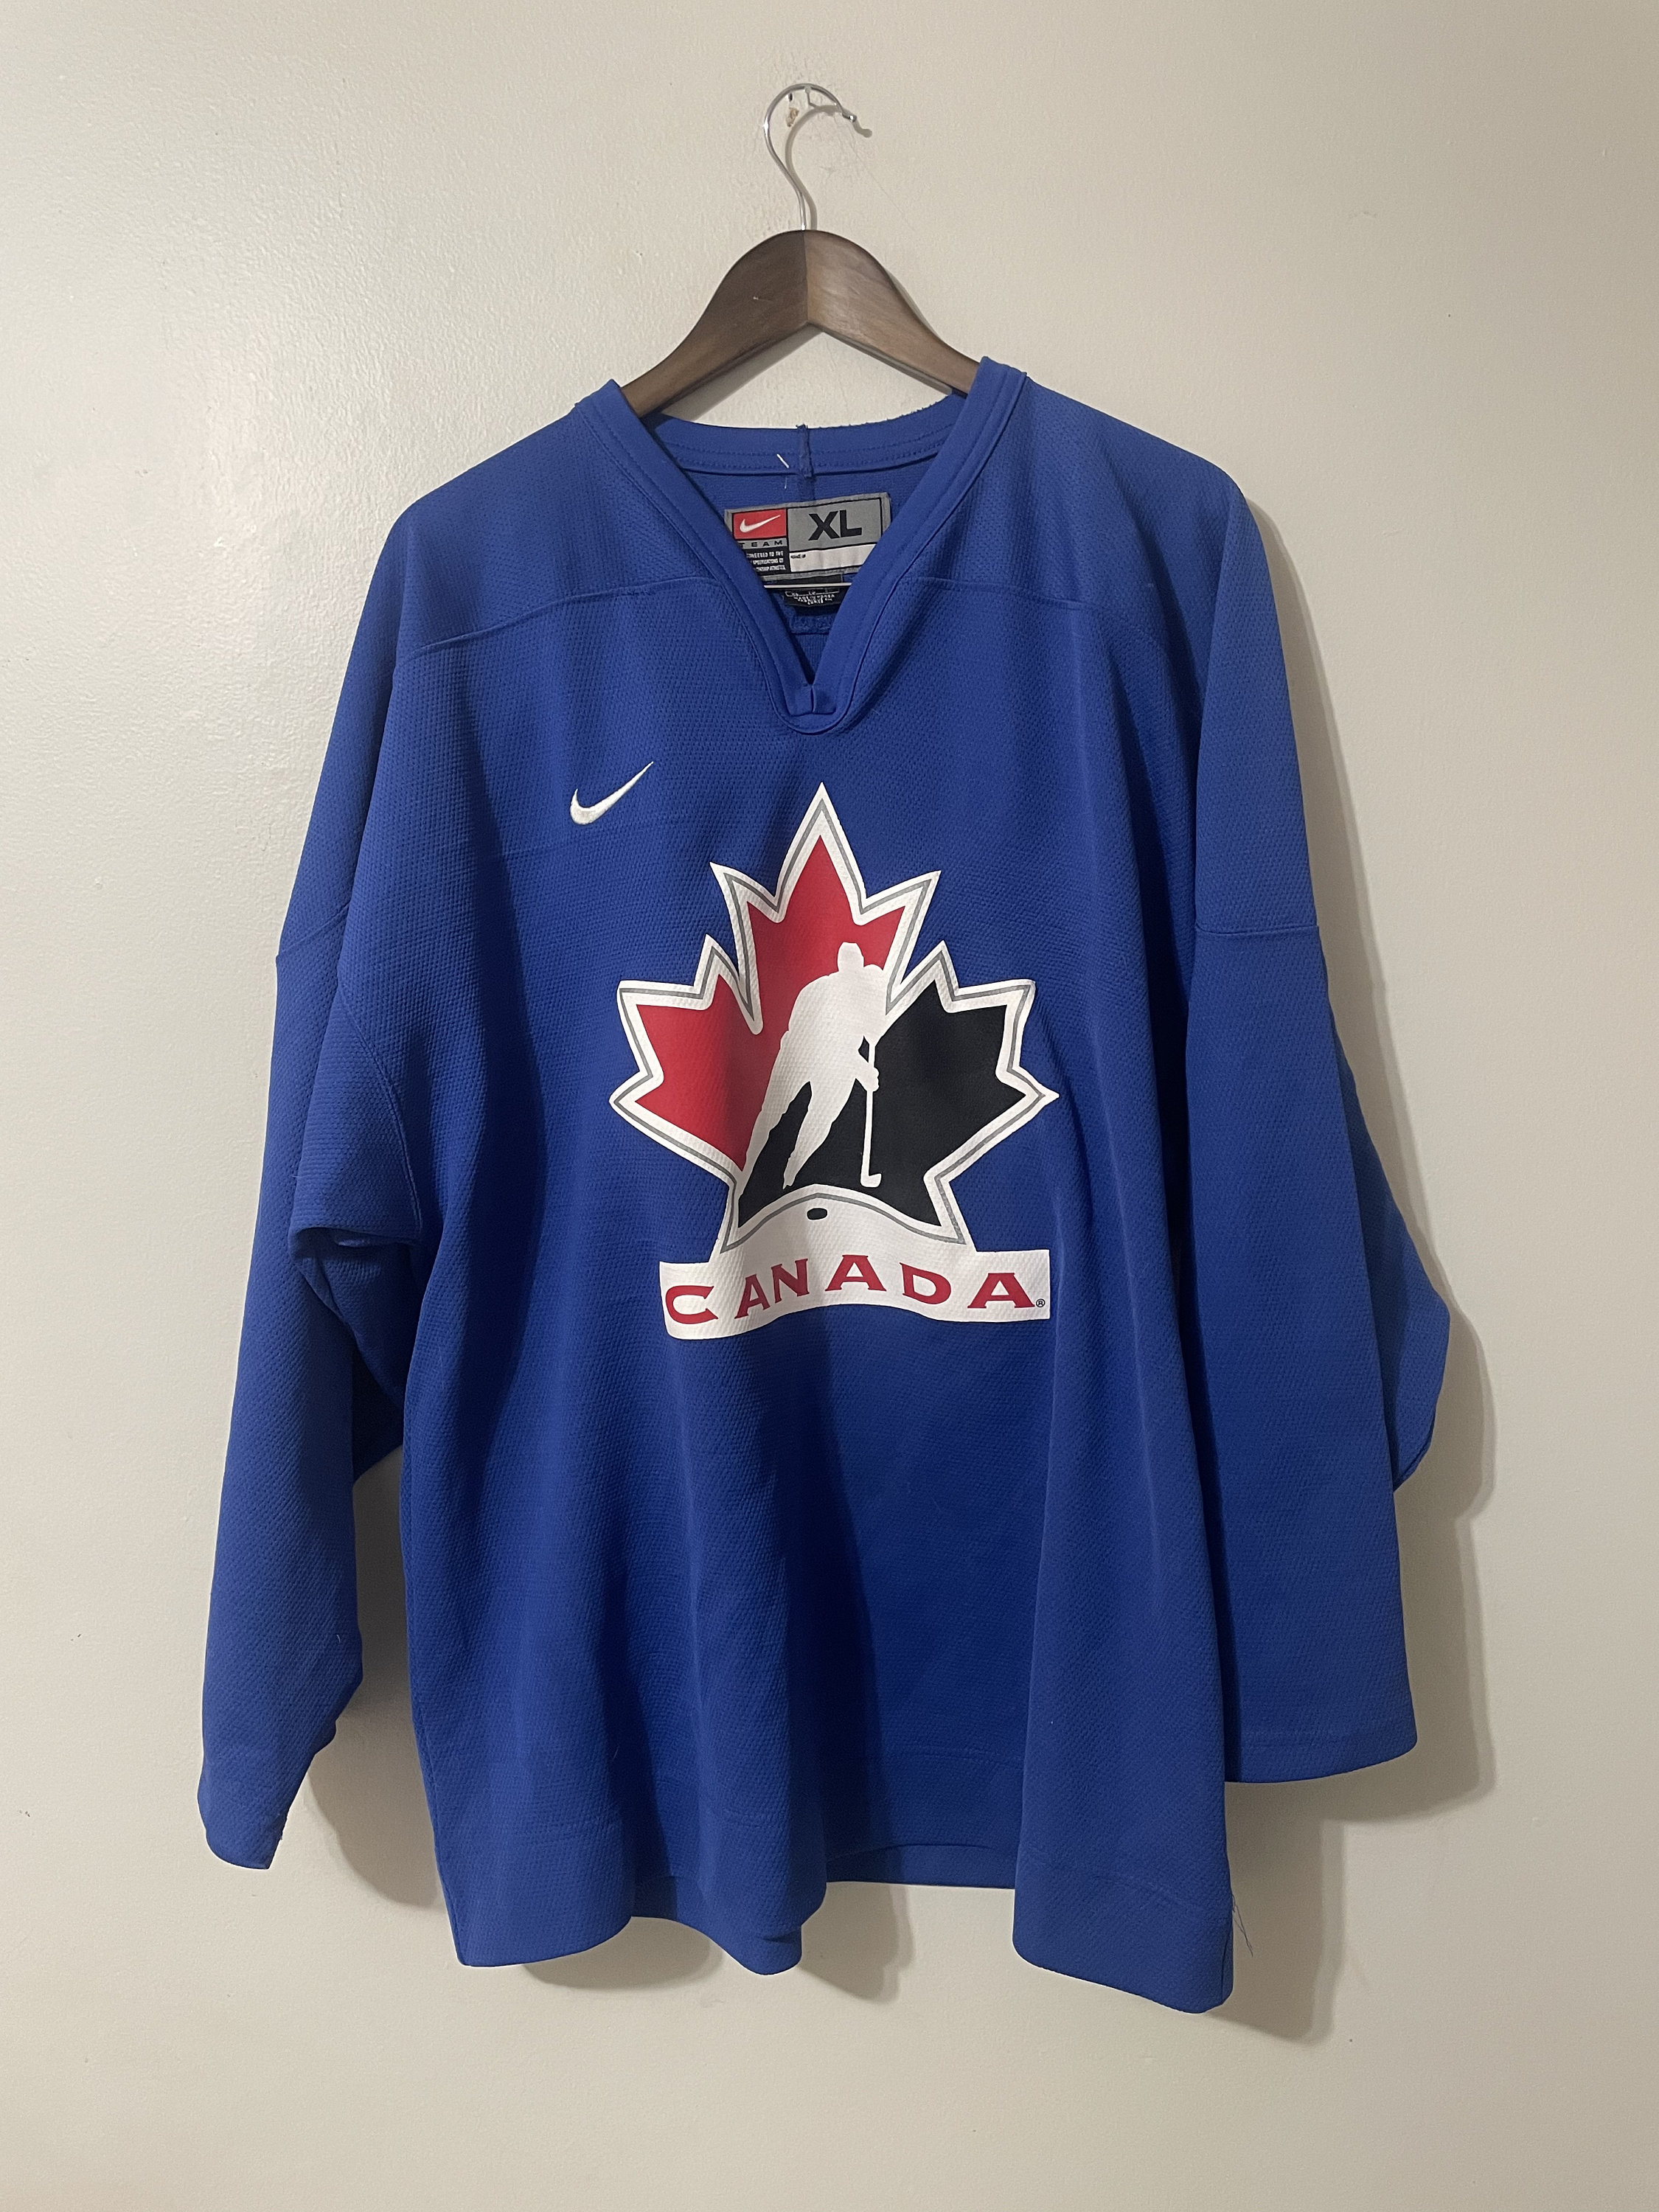 Nike, Shirts & Tops, Vintage Nike Team Canada Hockey Jersey 20 Vancouver  Olympics Youth Size L